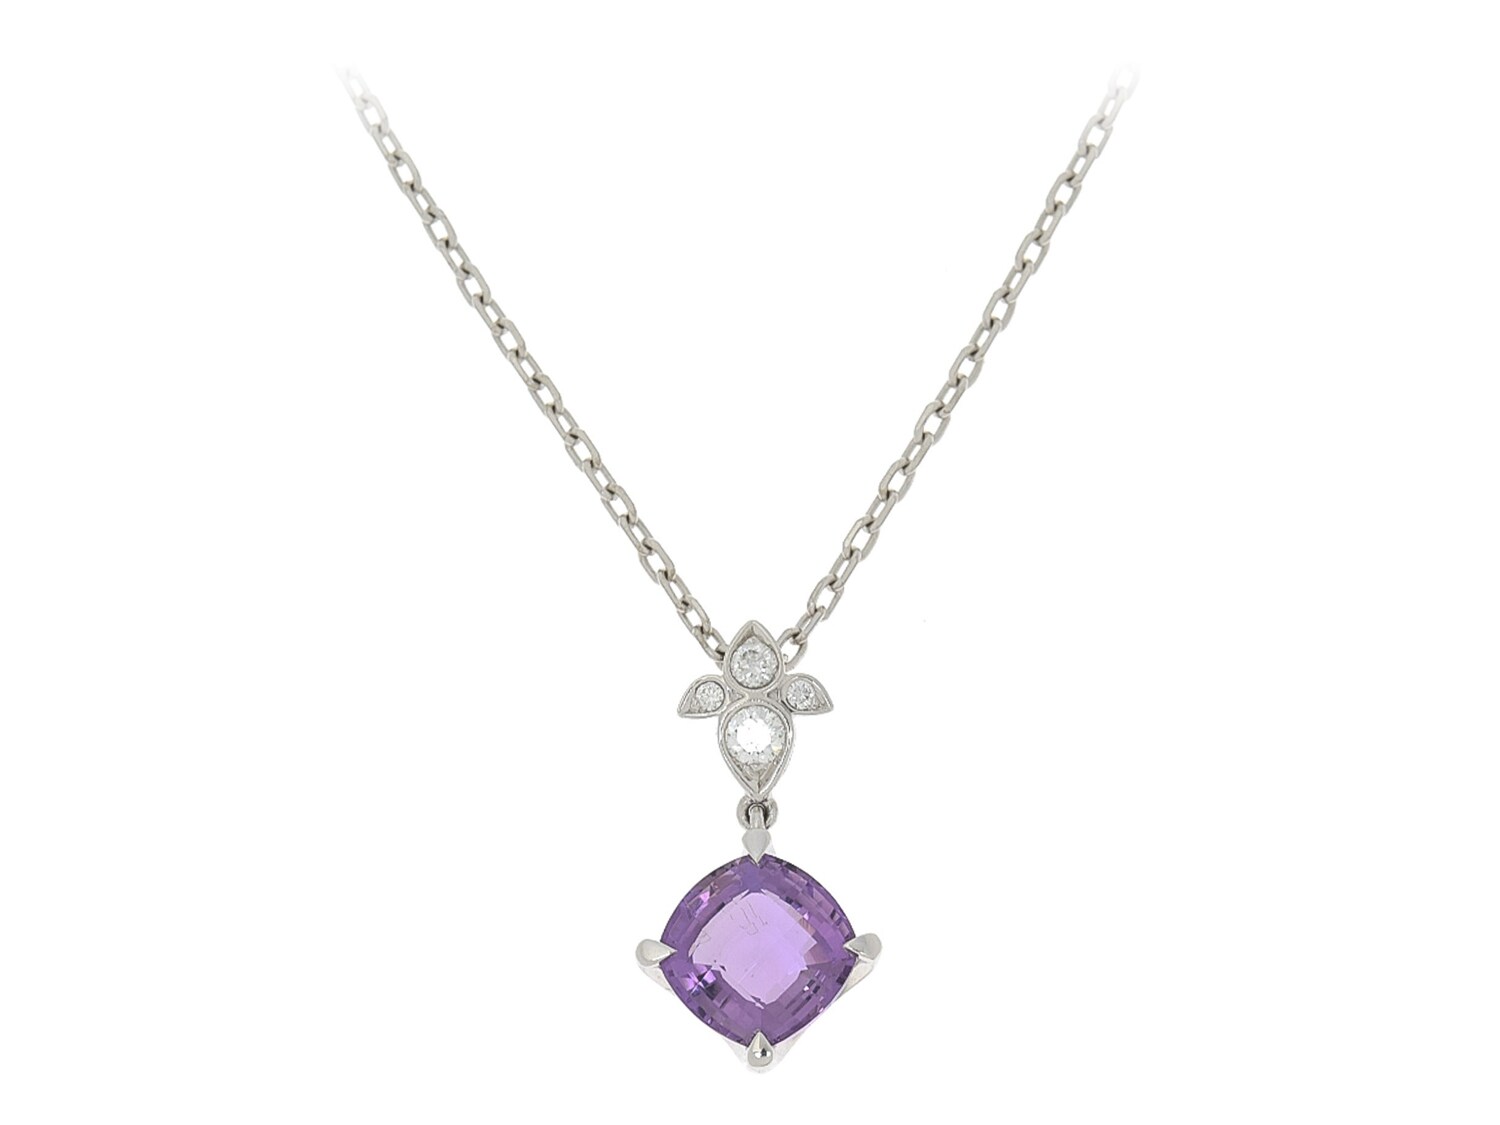 Cartier - Vintage Luxury Amethyst Diamond Necklace - Free Shipping | DSW